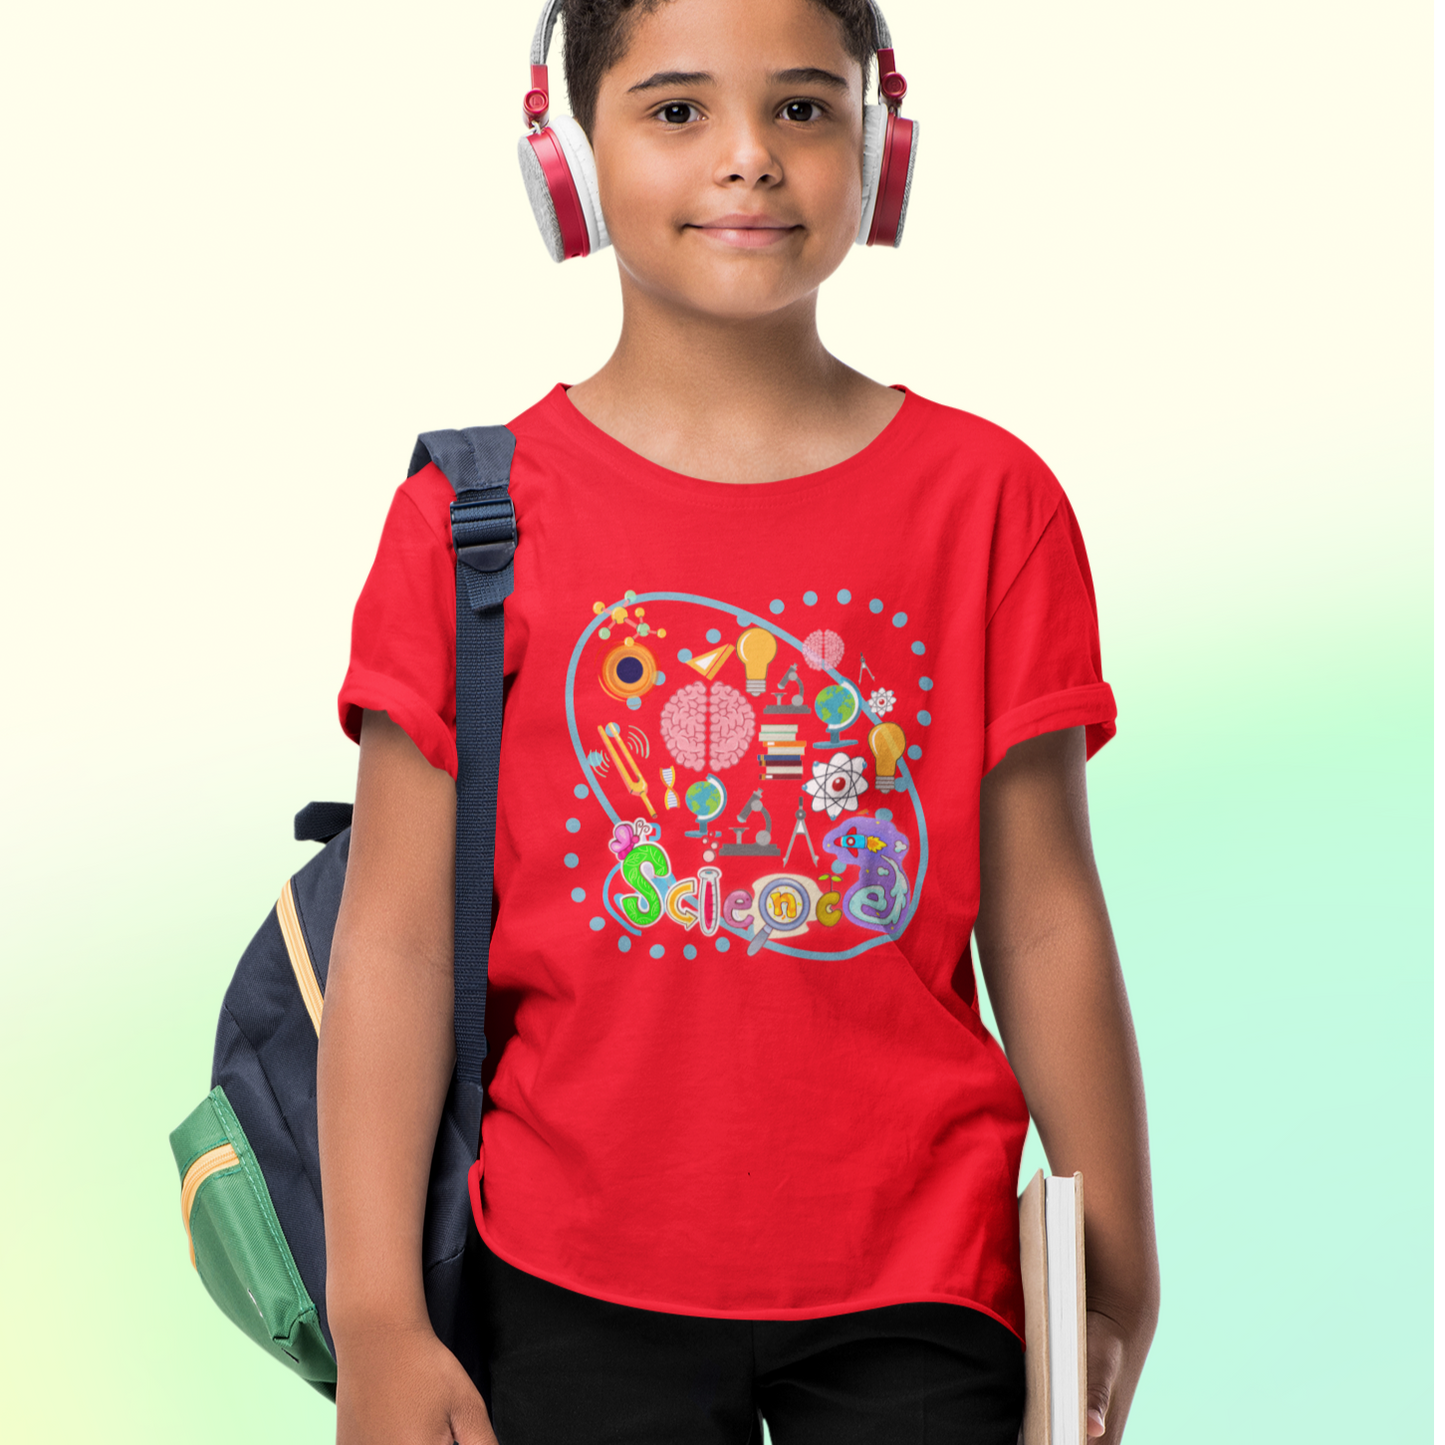 Science T-shirt for Boy Red